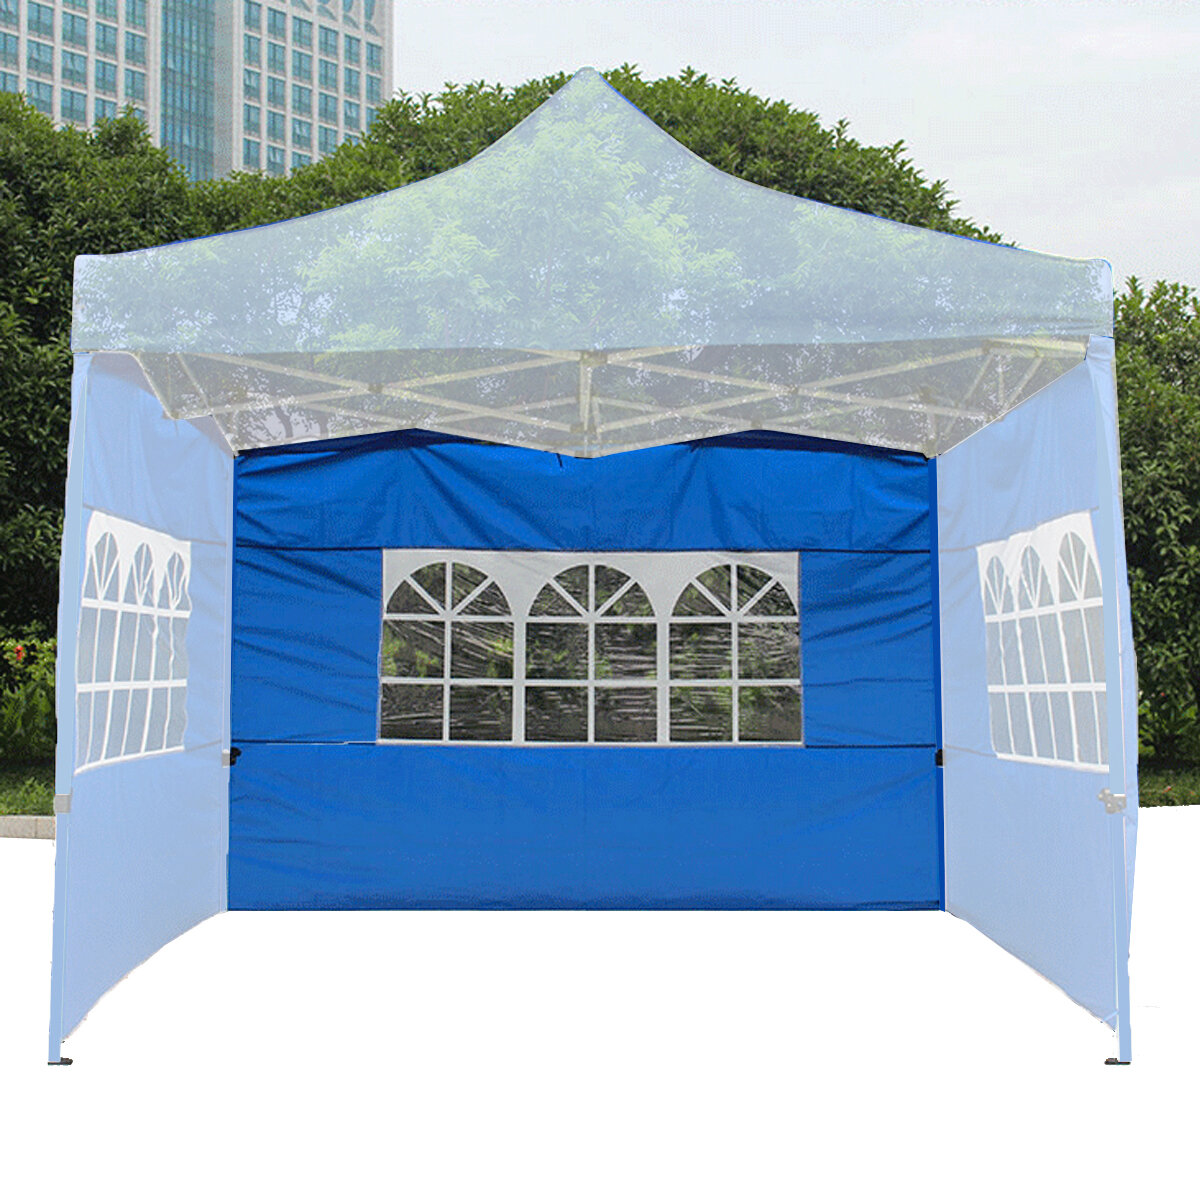 3x3m Medical Tent Sidewalls Cloth Camping Travel Picnic Tent Canopy Awning Sunshade Cover With Window Design